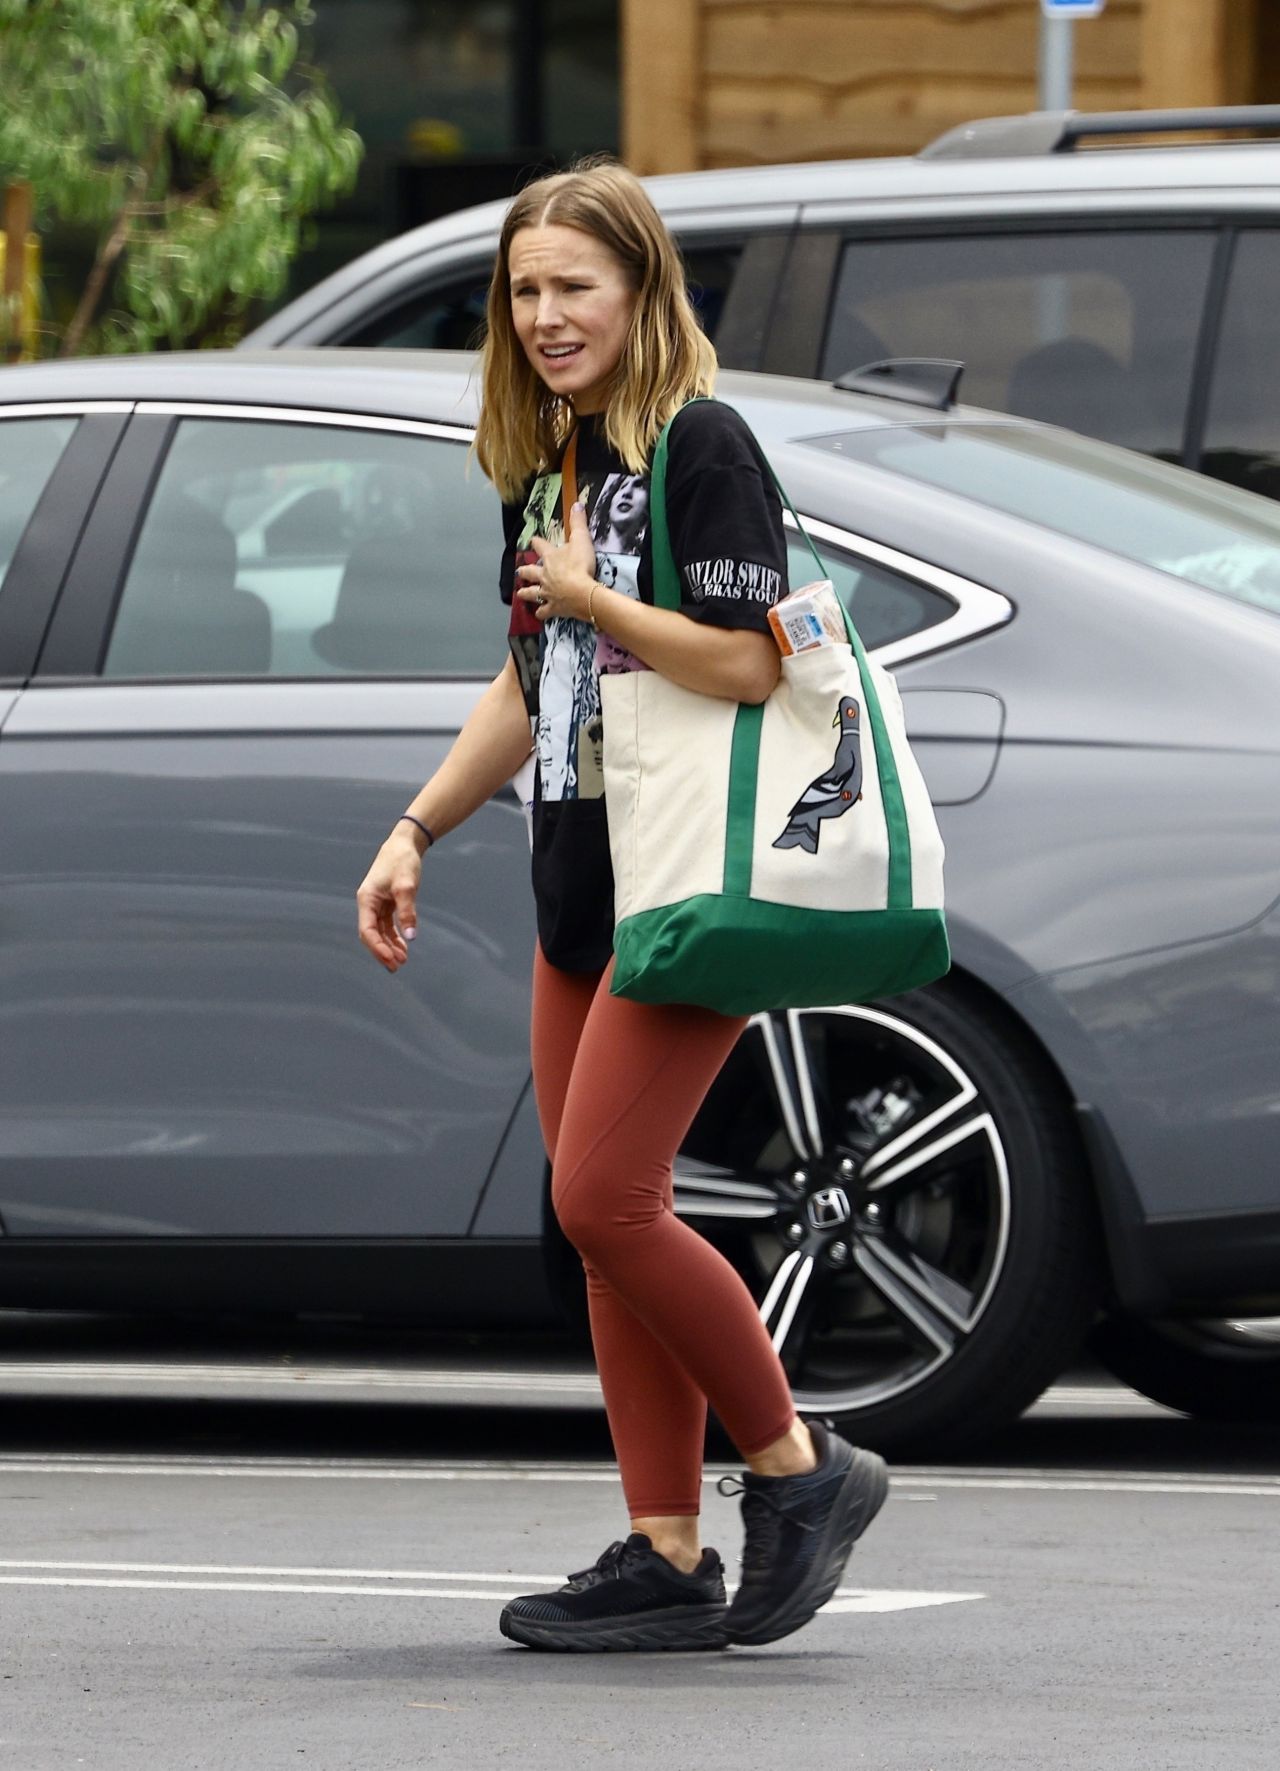 KRISTEN BELL in Shorts Out and About in West Hollywood – HawtCelebs